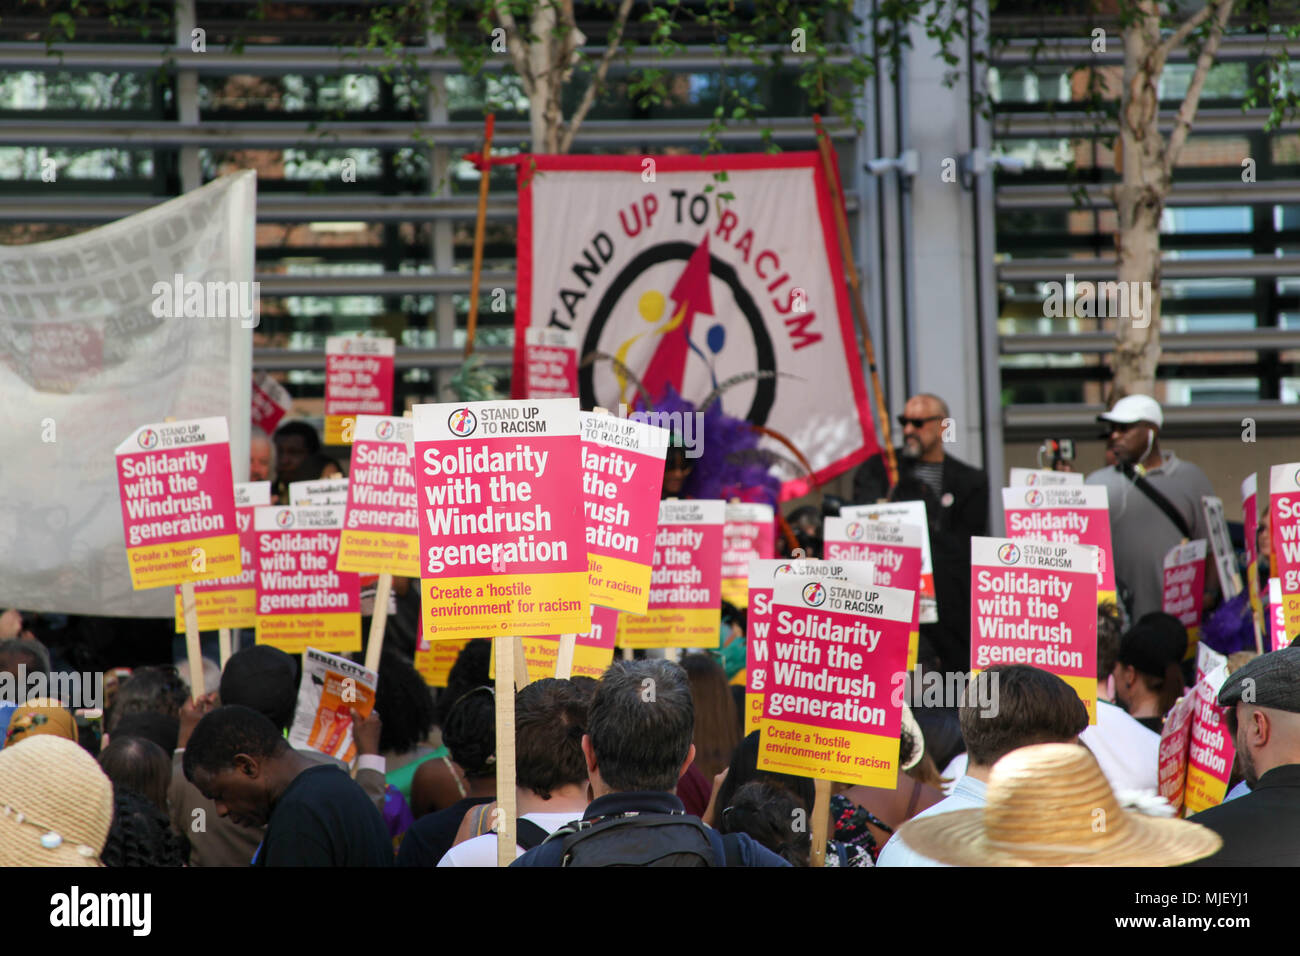 London, UK. 5th May, 2018. Solidarity with Windrush Credit: Alex Cavendish/Alamy Live News Stock Photo